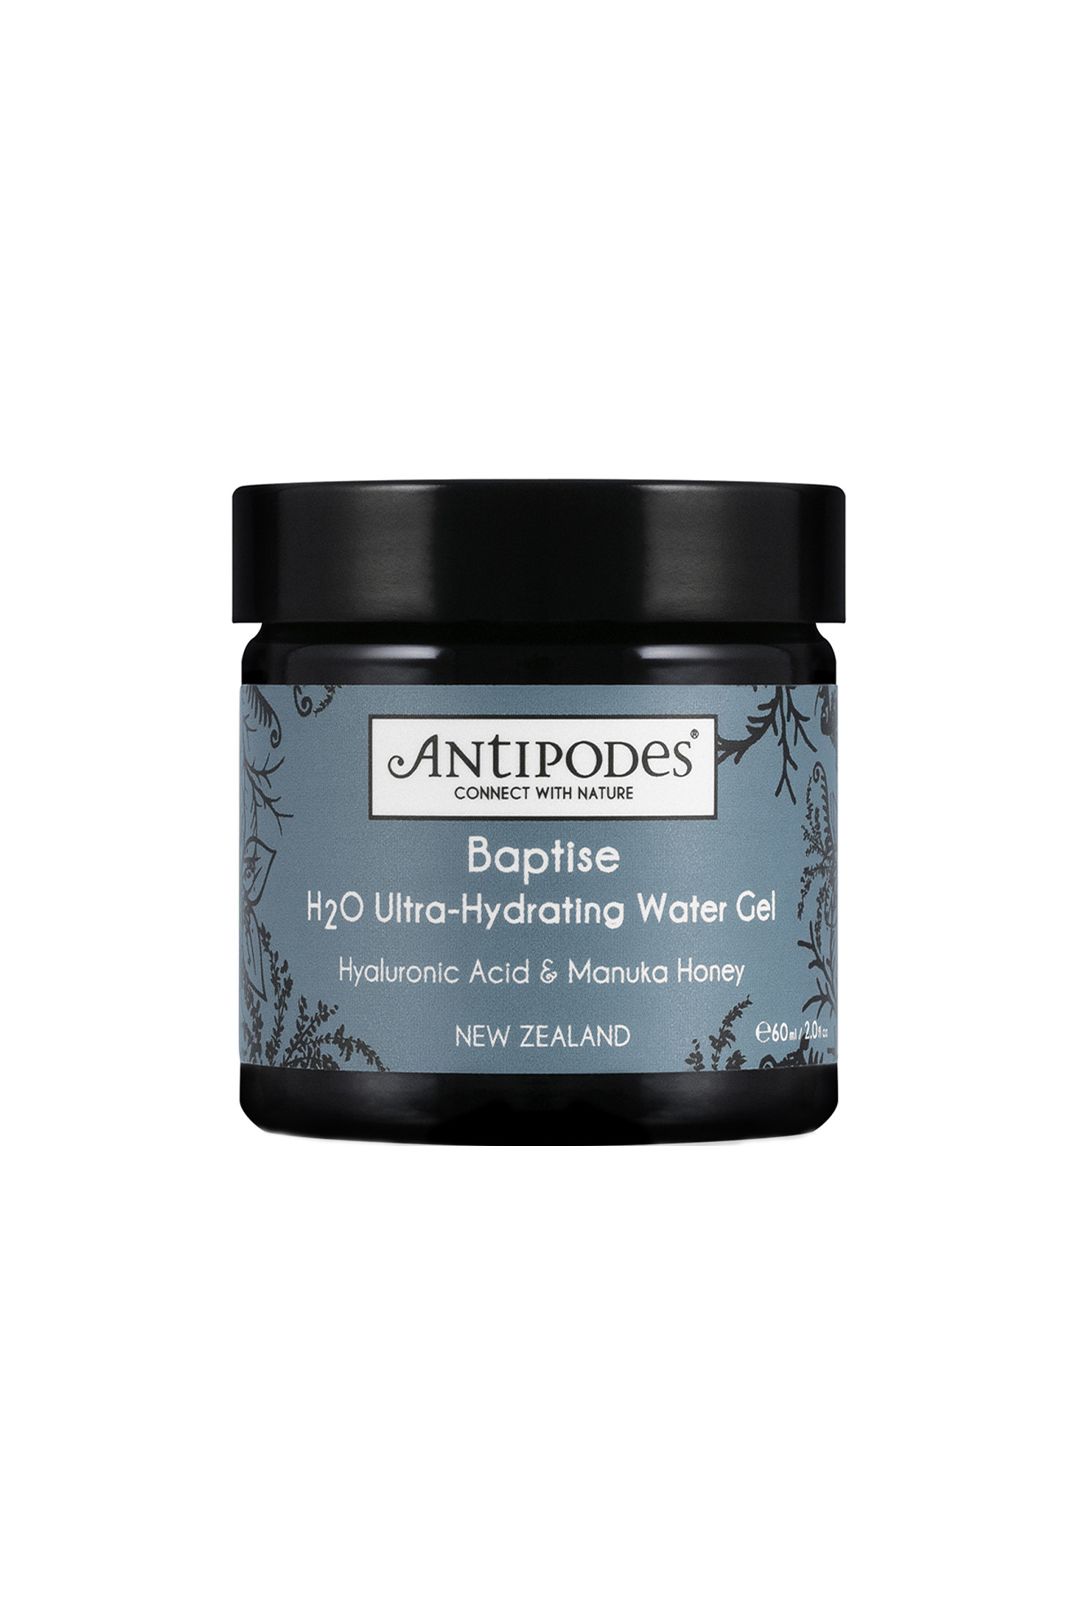 antipodes-baptise-h2o-ultra-hydrating-water-gel-60ml